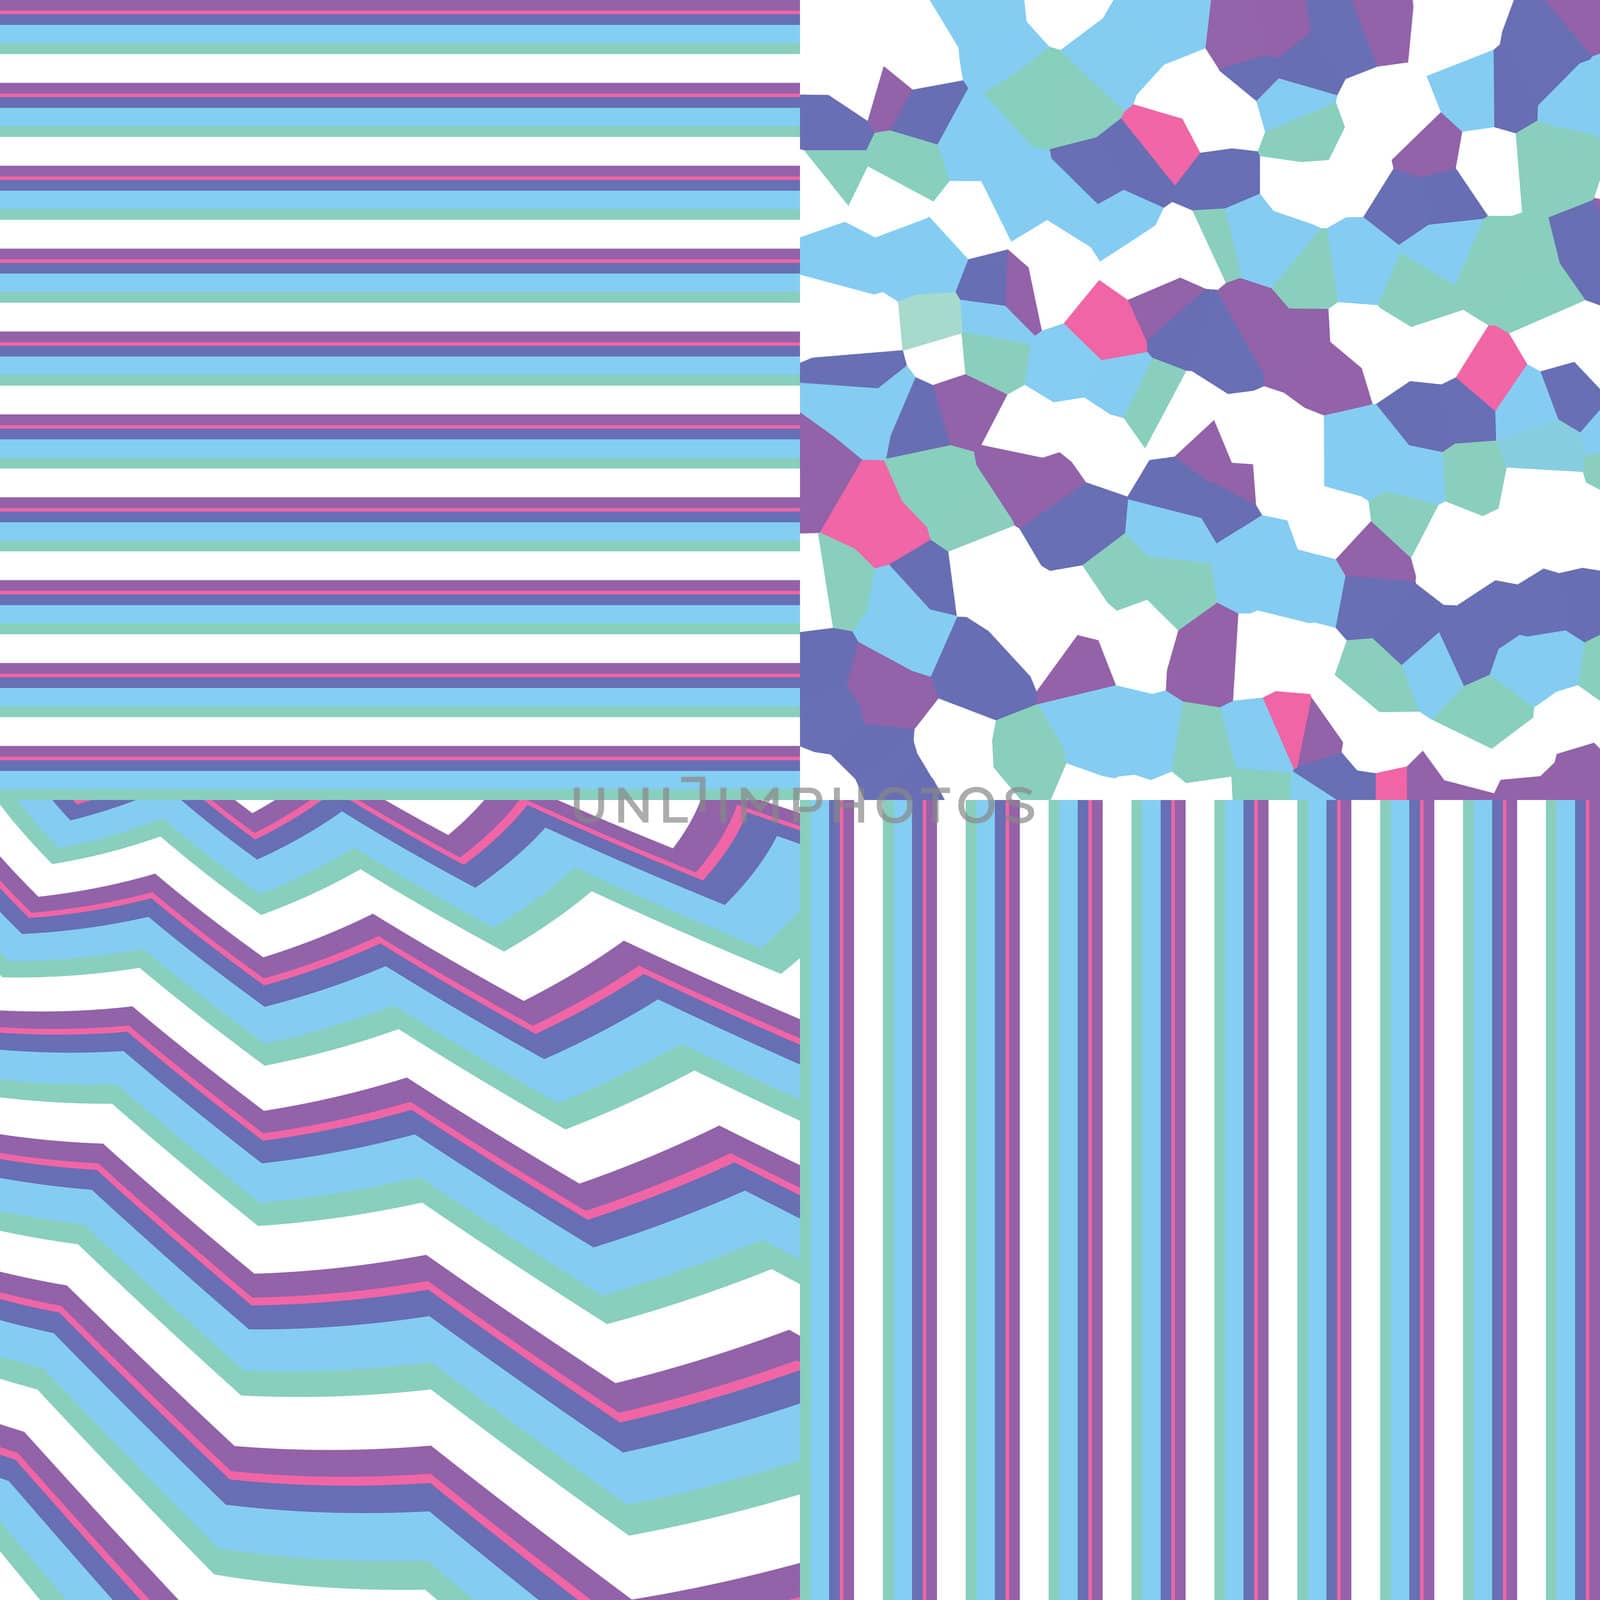 Four pattern variations using the same color scheme 